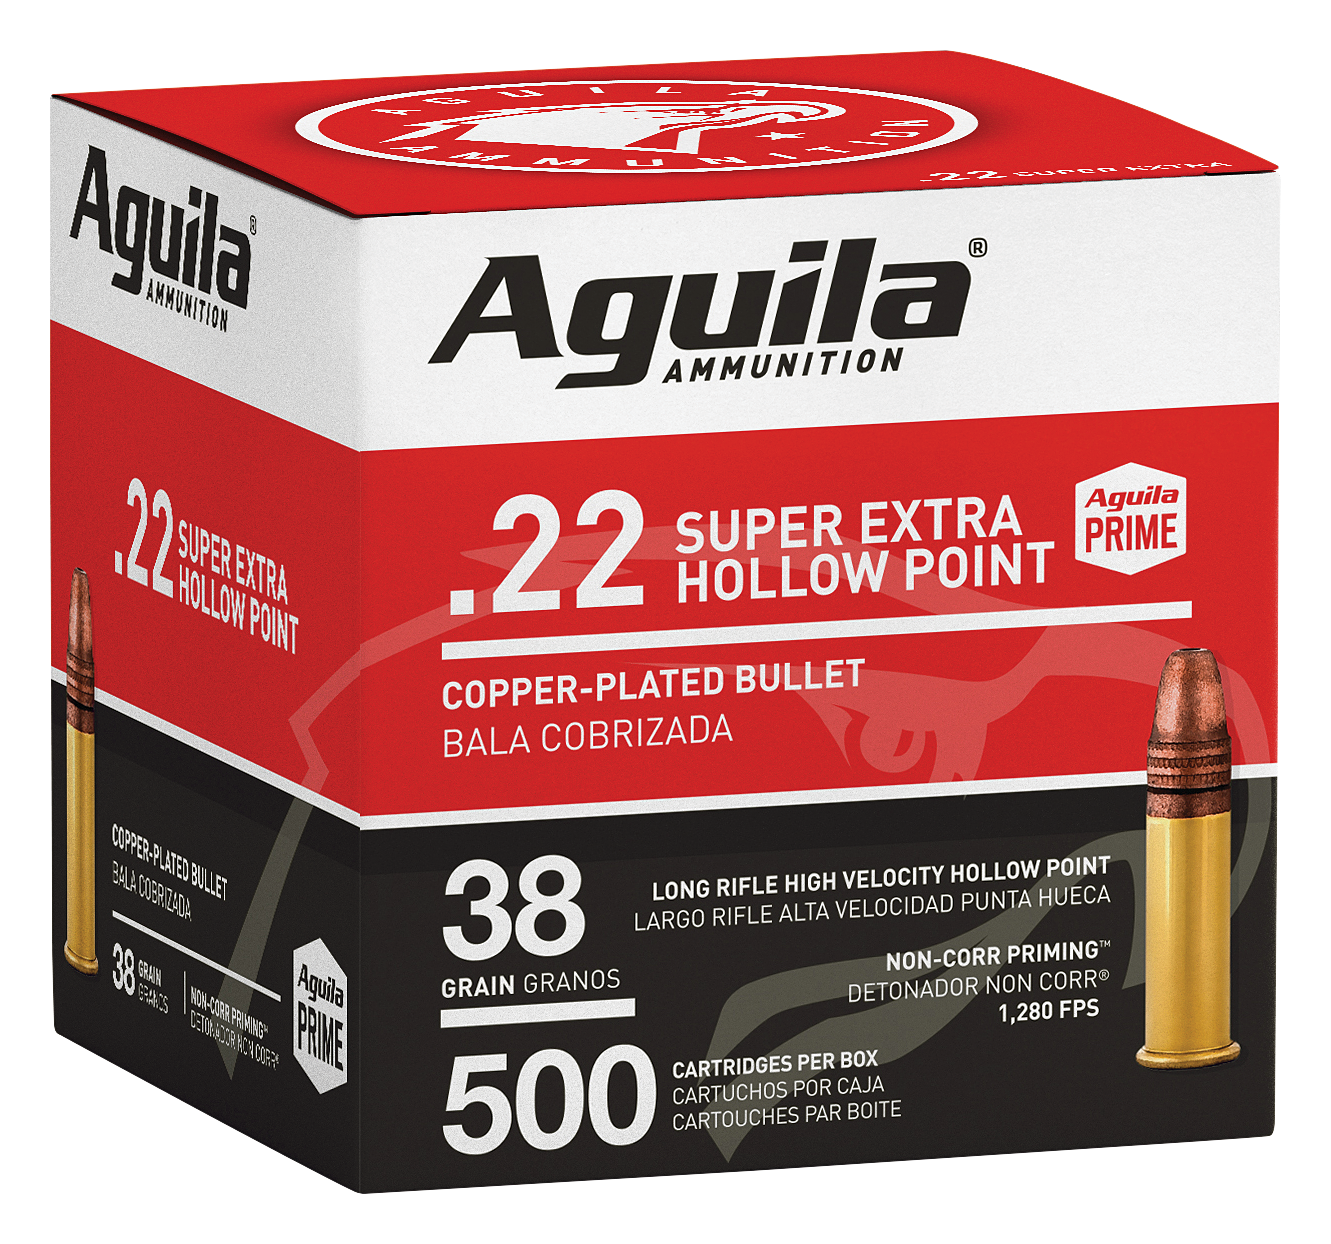 Aguila Prime Super Extra Copper-Plated High-Velocity Hollow Point 500-Count Ammo - .22 Long Rifle - 38 Grain